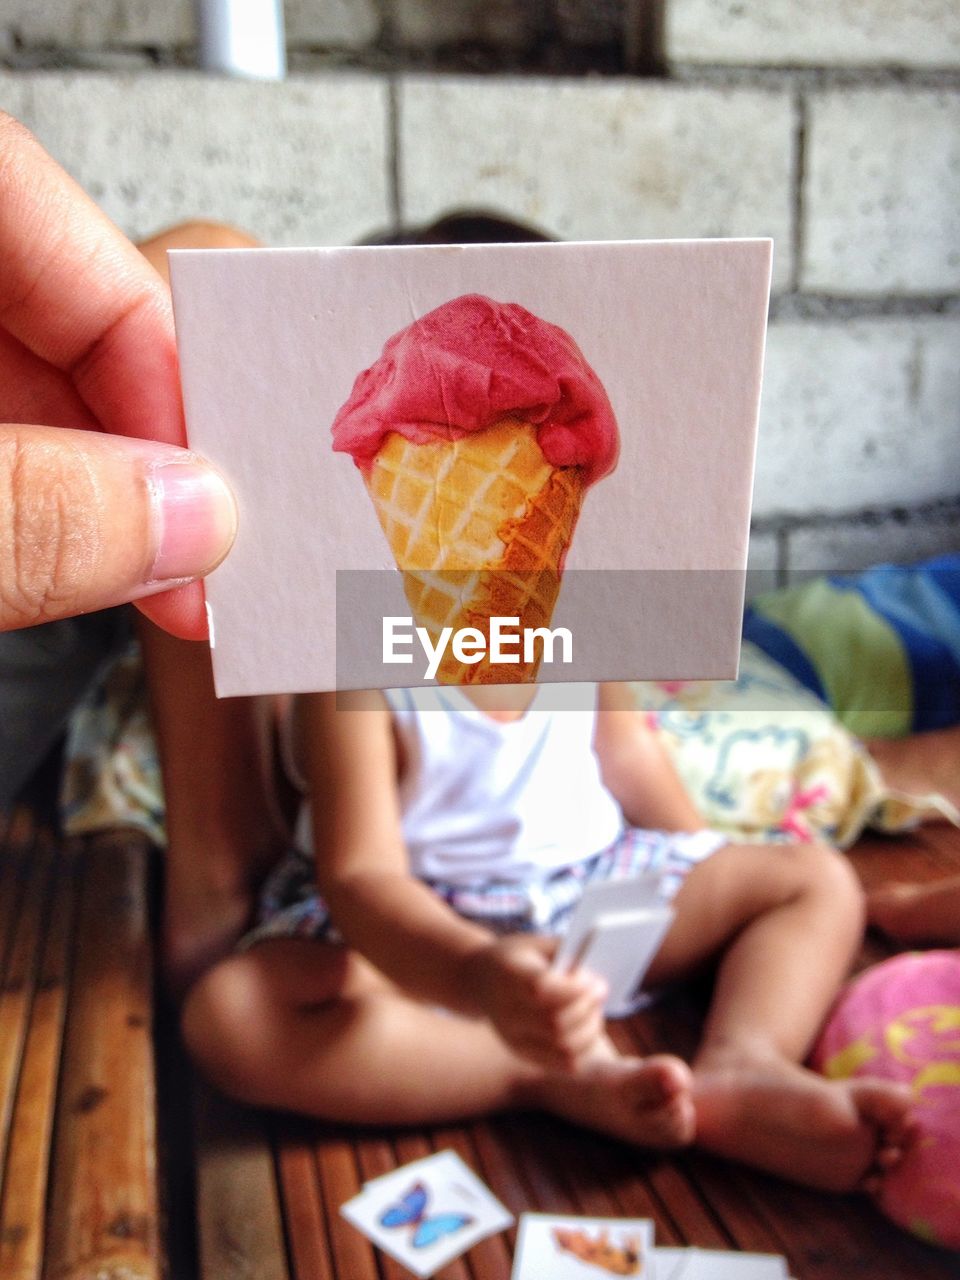 Cropped hand holding ice cream photograph against child